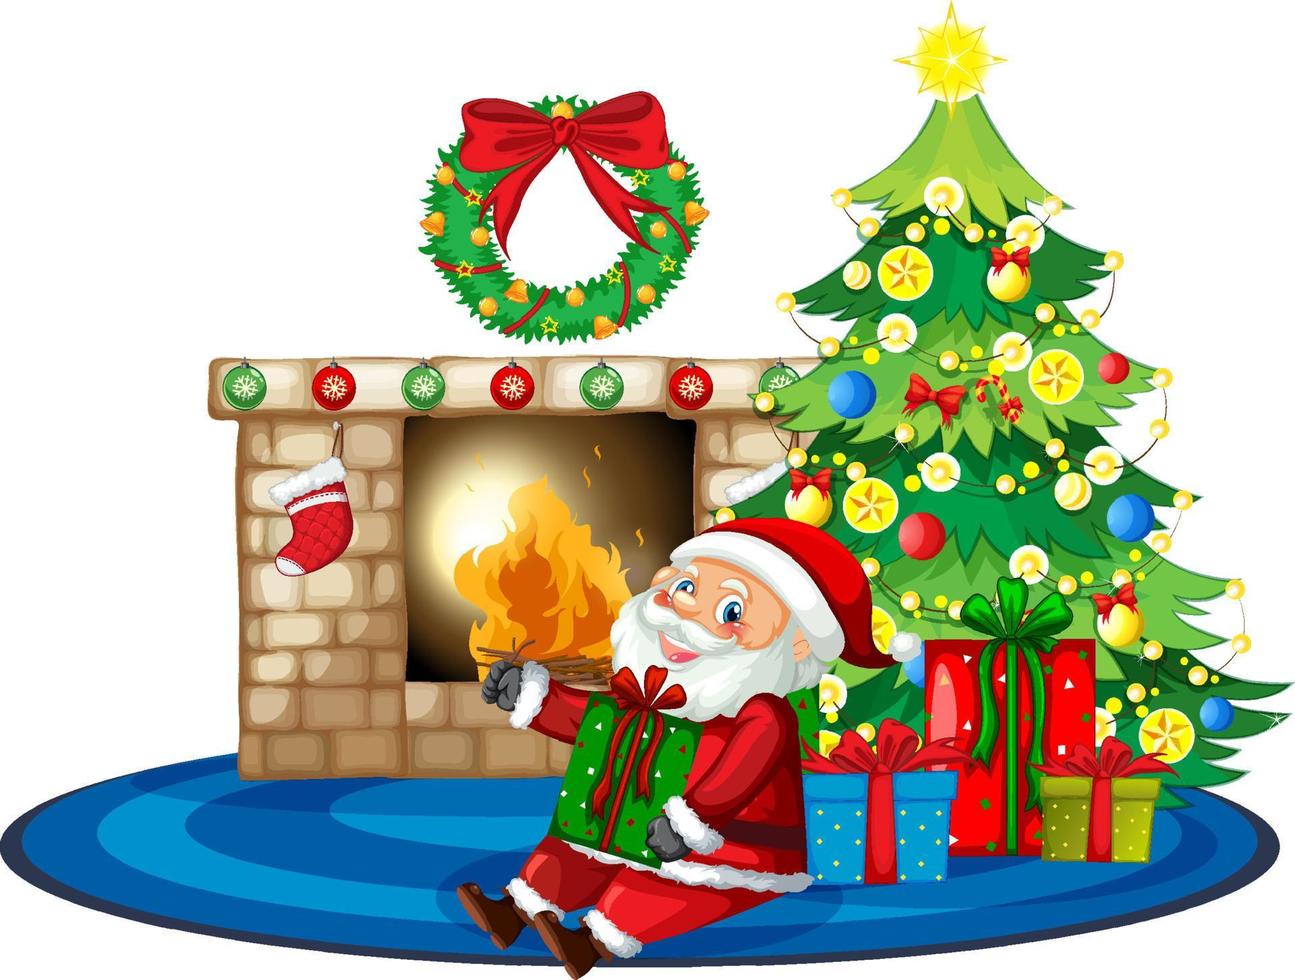 Santa Claus sitting front fireplace with many gift boxes vector